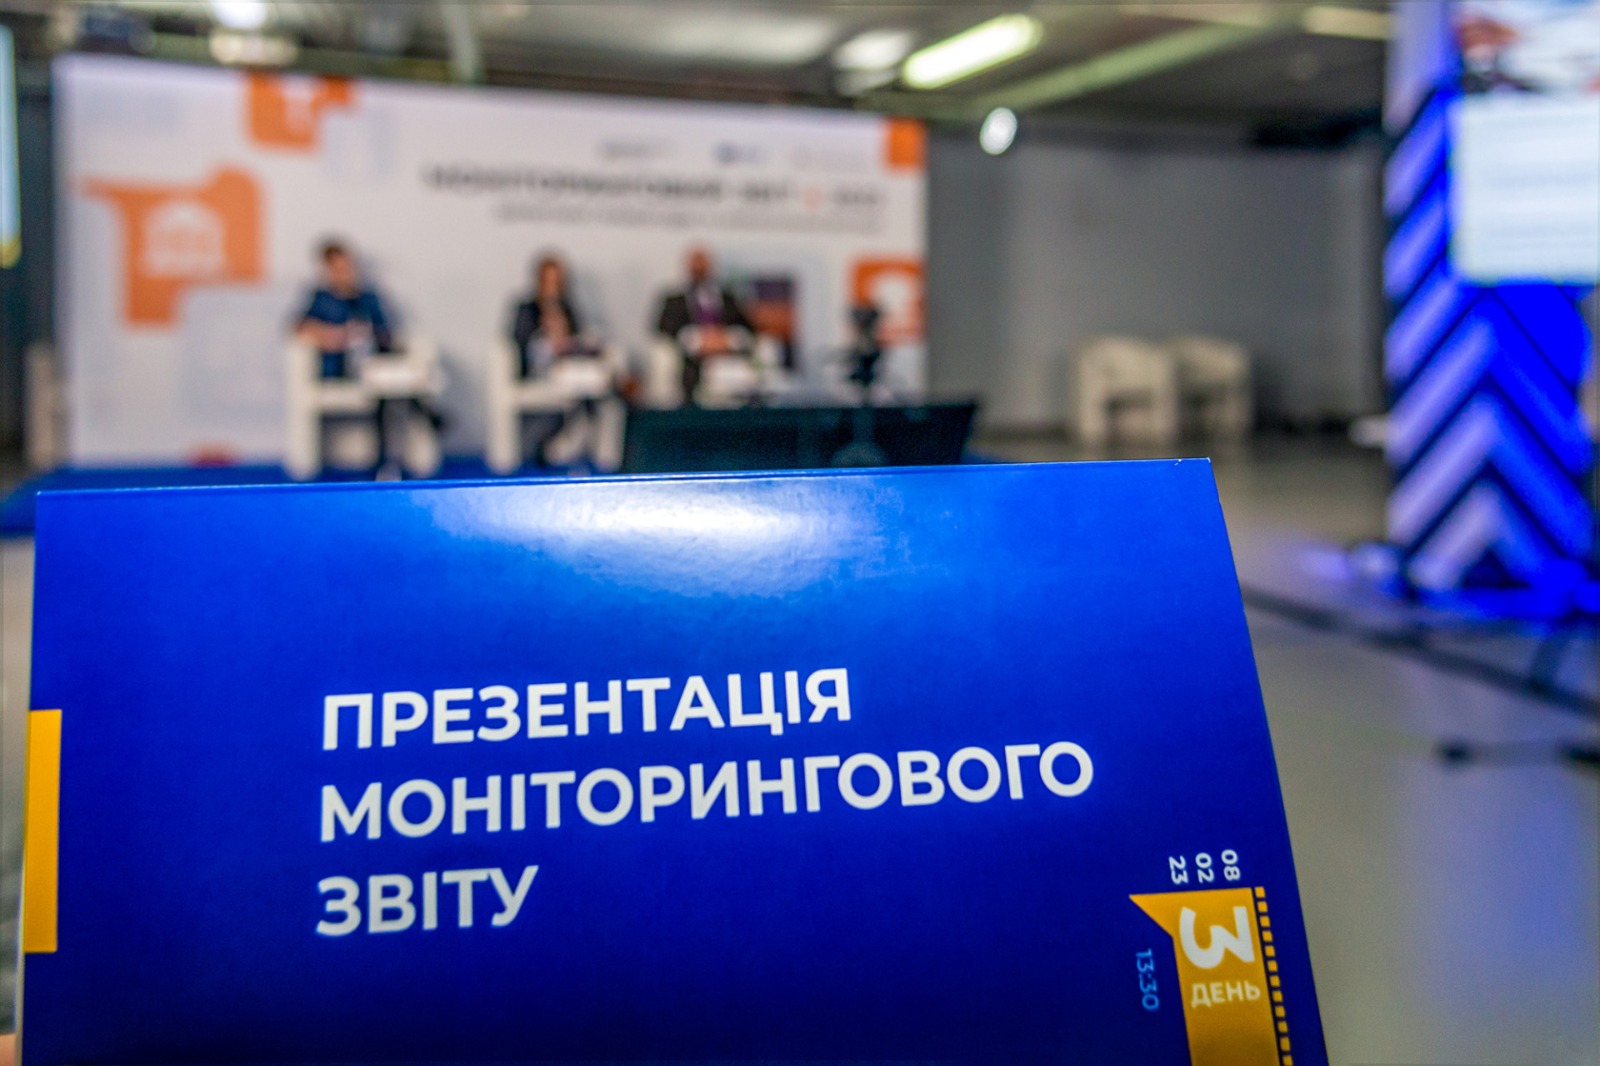 The EU Project Pravo-Justice together with the Ministry of Justice presented the monitoring report for 2022 in the field of forensic examination